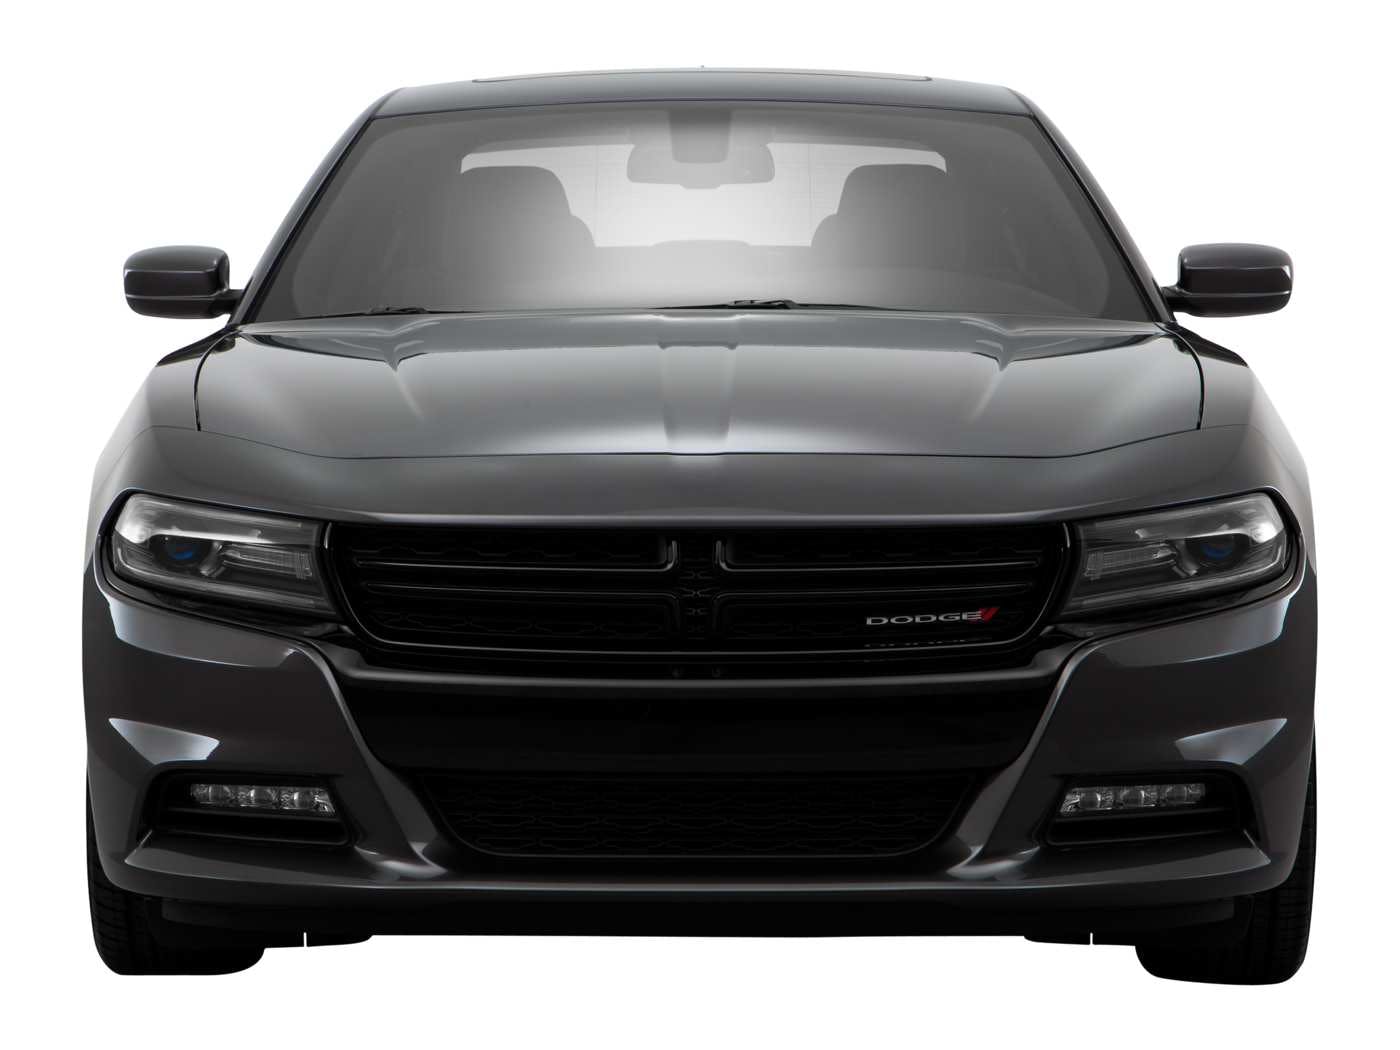 2018 Dodge Charger Review  Pricing, Trims & Photos - TrueCar